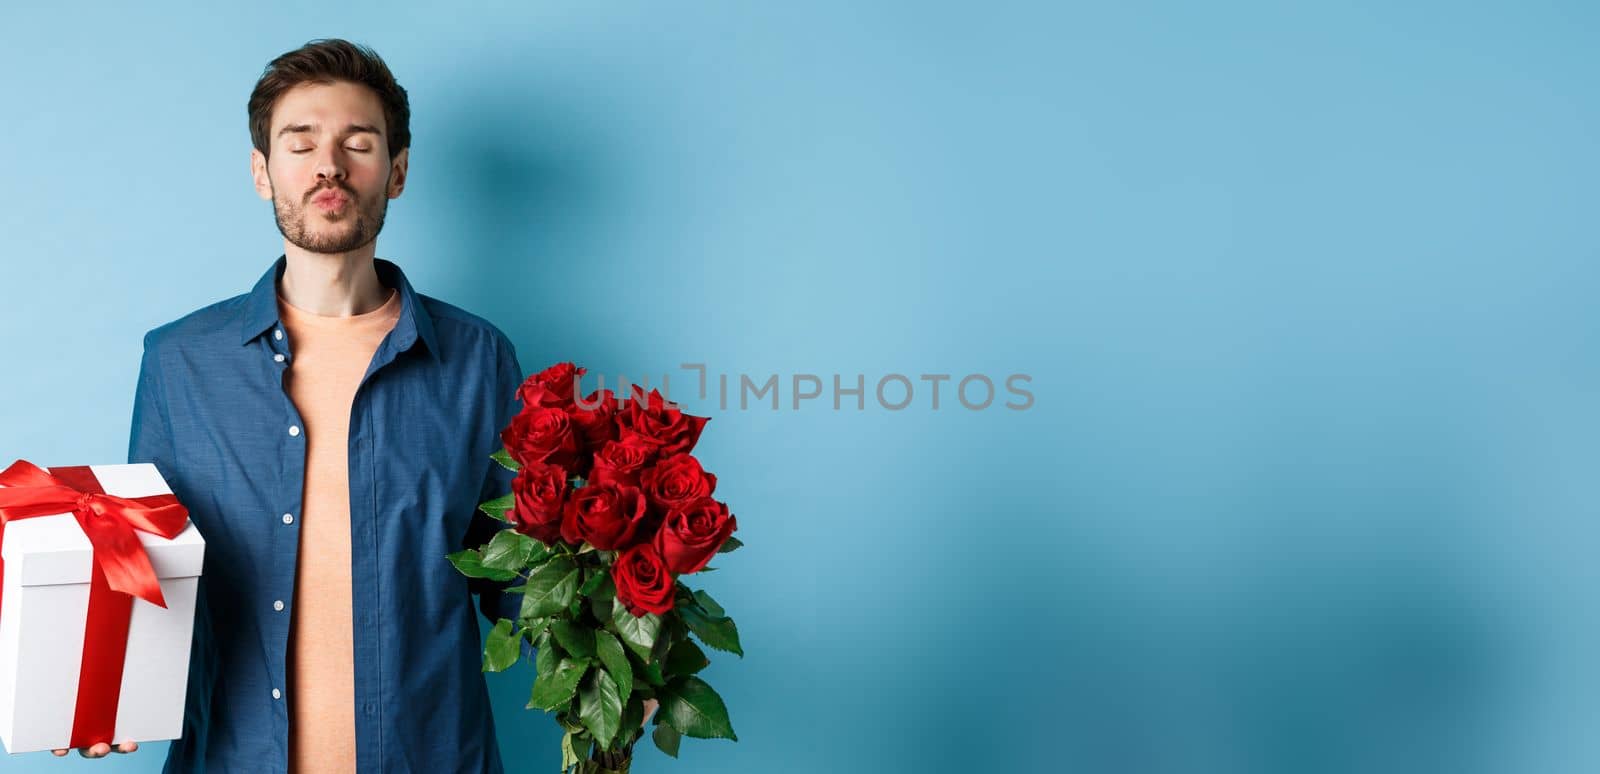 Love and Valentines day concept. Romantic man waiting for kiss, holding gift box and bouquet of red roses for lover on date, standing over blue background.